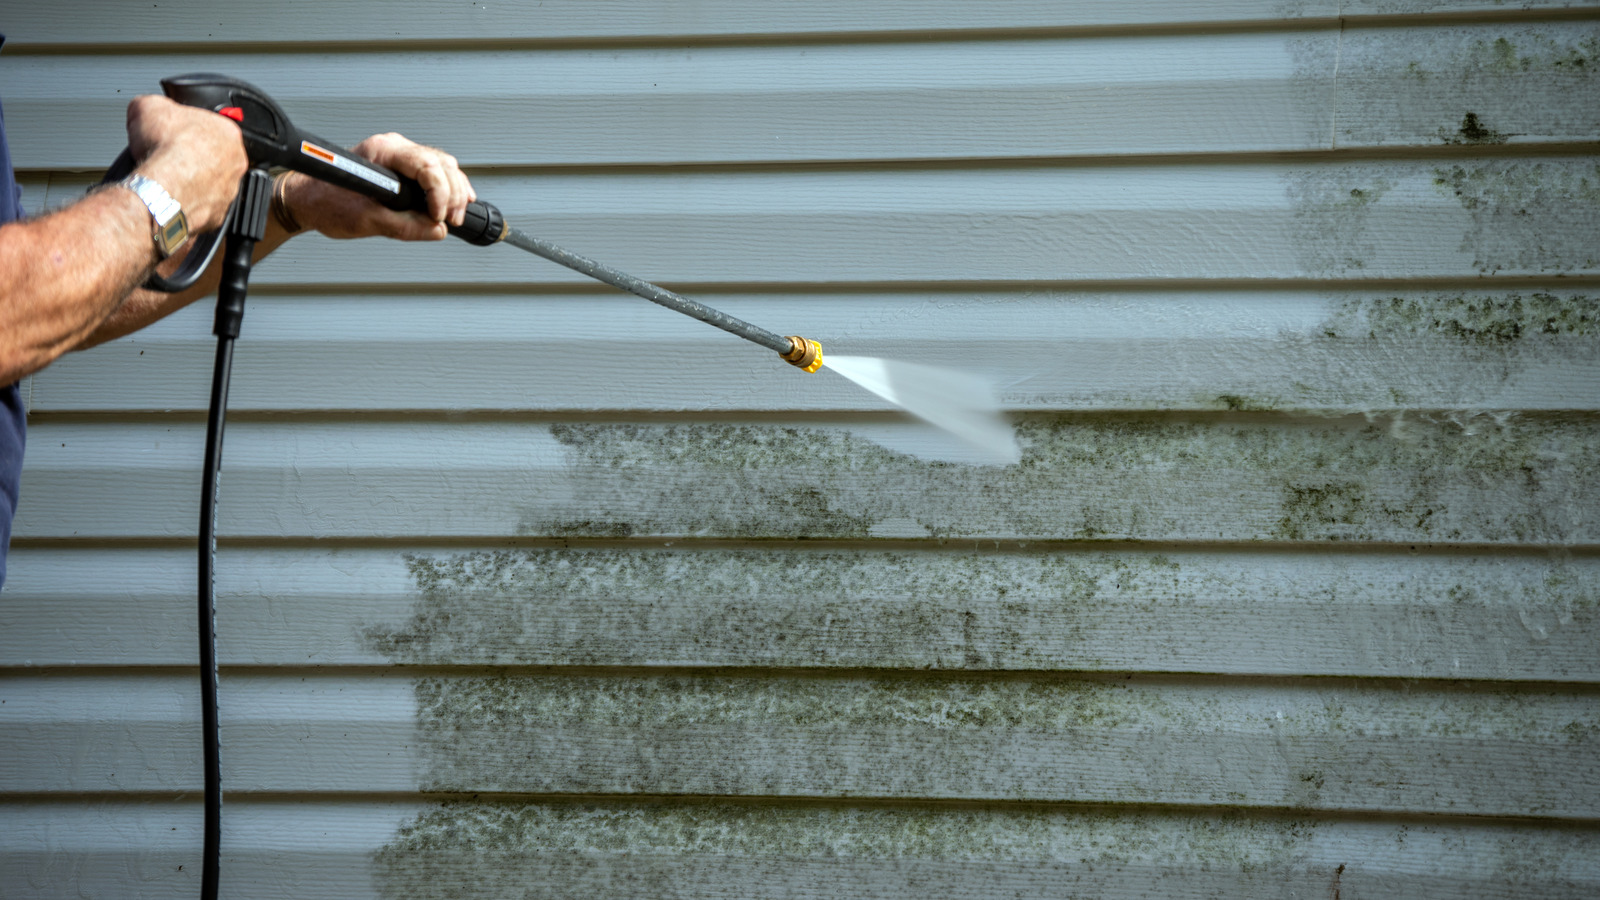 Saving Money With Professional Pressure Washing Services